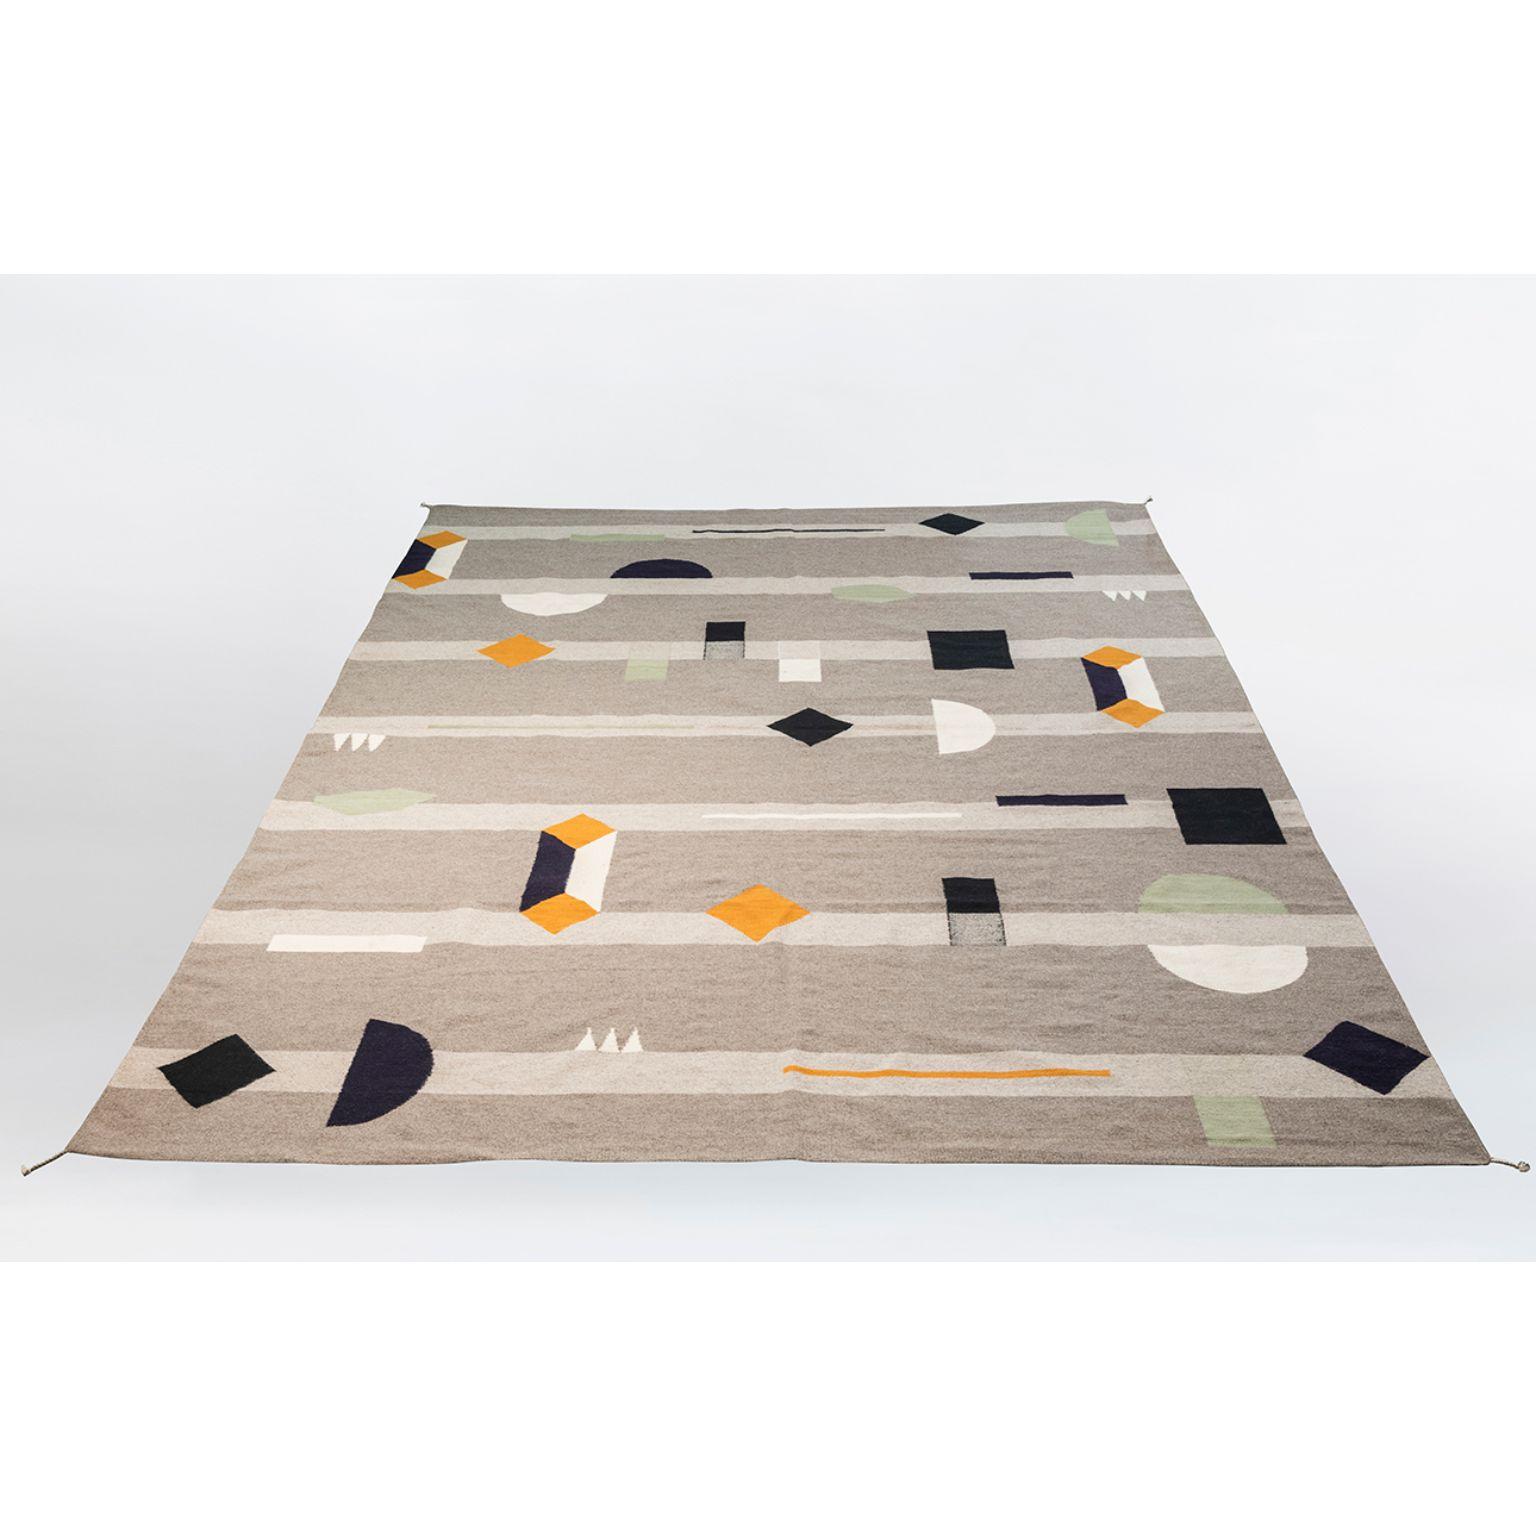 Playtime rug Eeny Meeny Miny Moe by Emma Boomkamp
Materials: W 400 x D 300 cm
Dimensions: Wool hand-knotted or tufted version

Other dimension available: W 300 x D200 cm.

Emma Boomkamp’s Playtime rug collection is inspired by the childhood. A